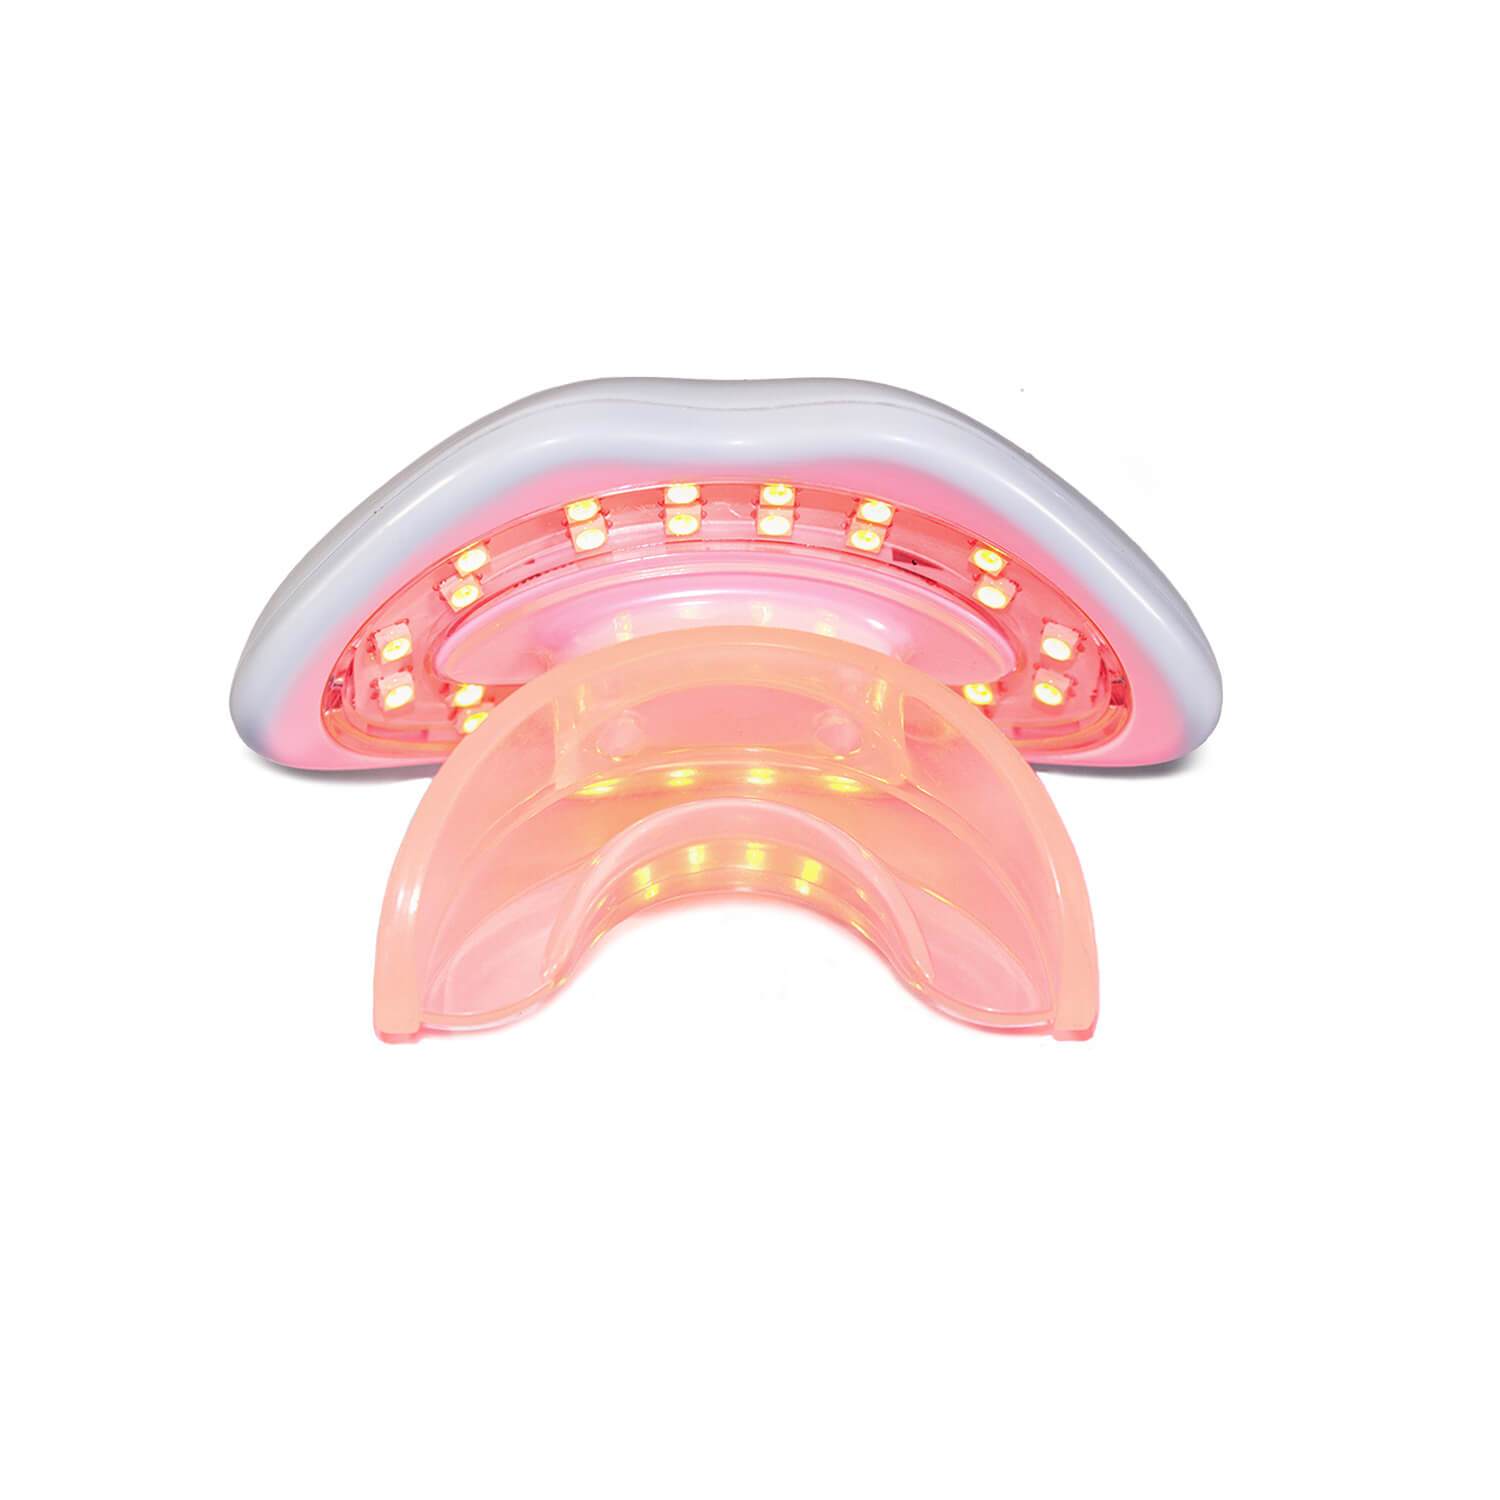 reVive Lip Care Light Therapy System - Carex Health Brands